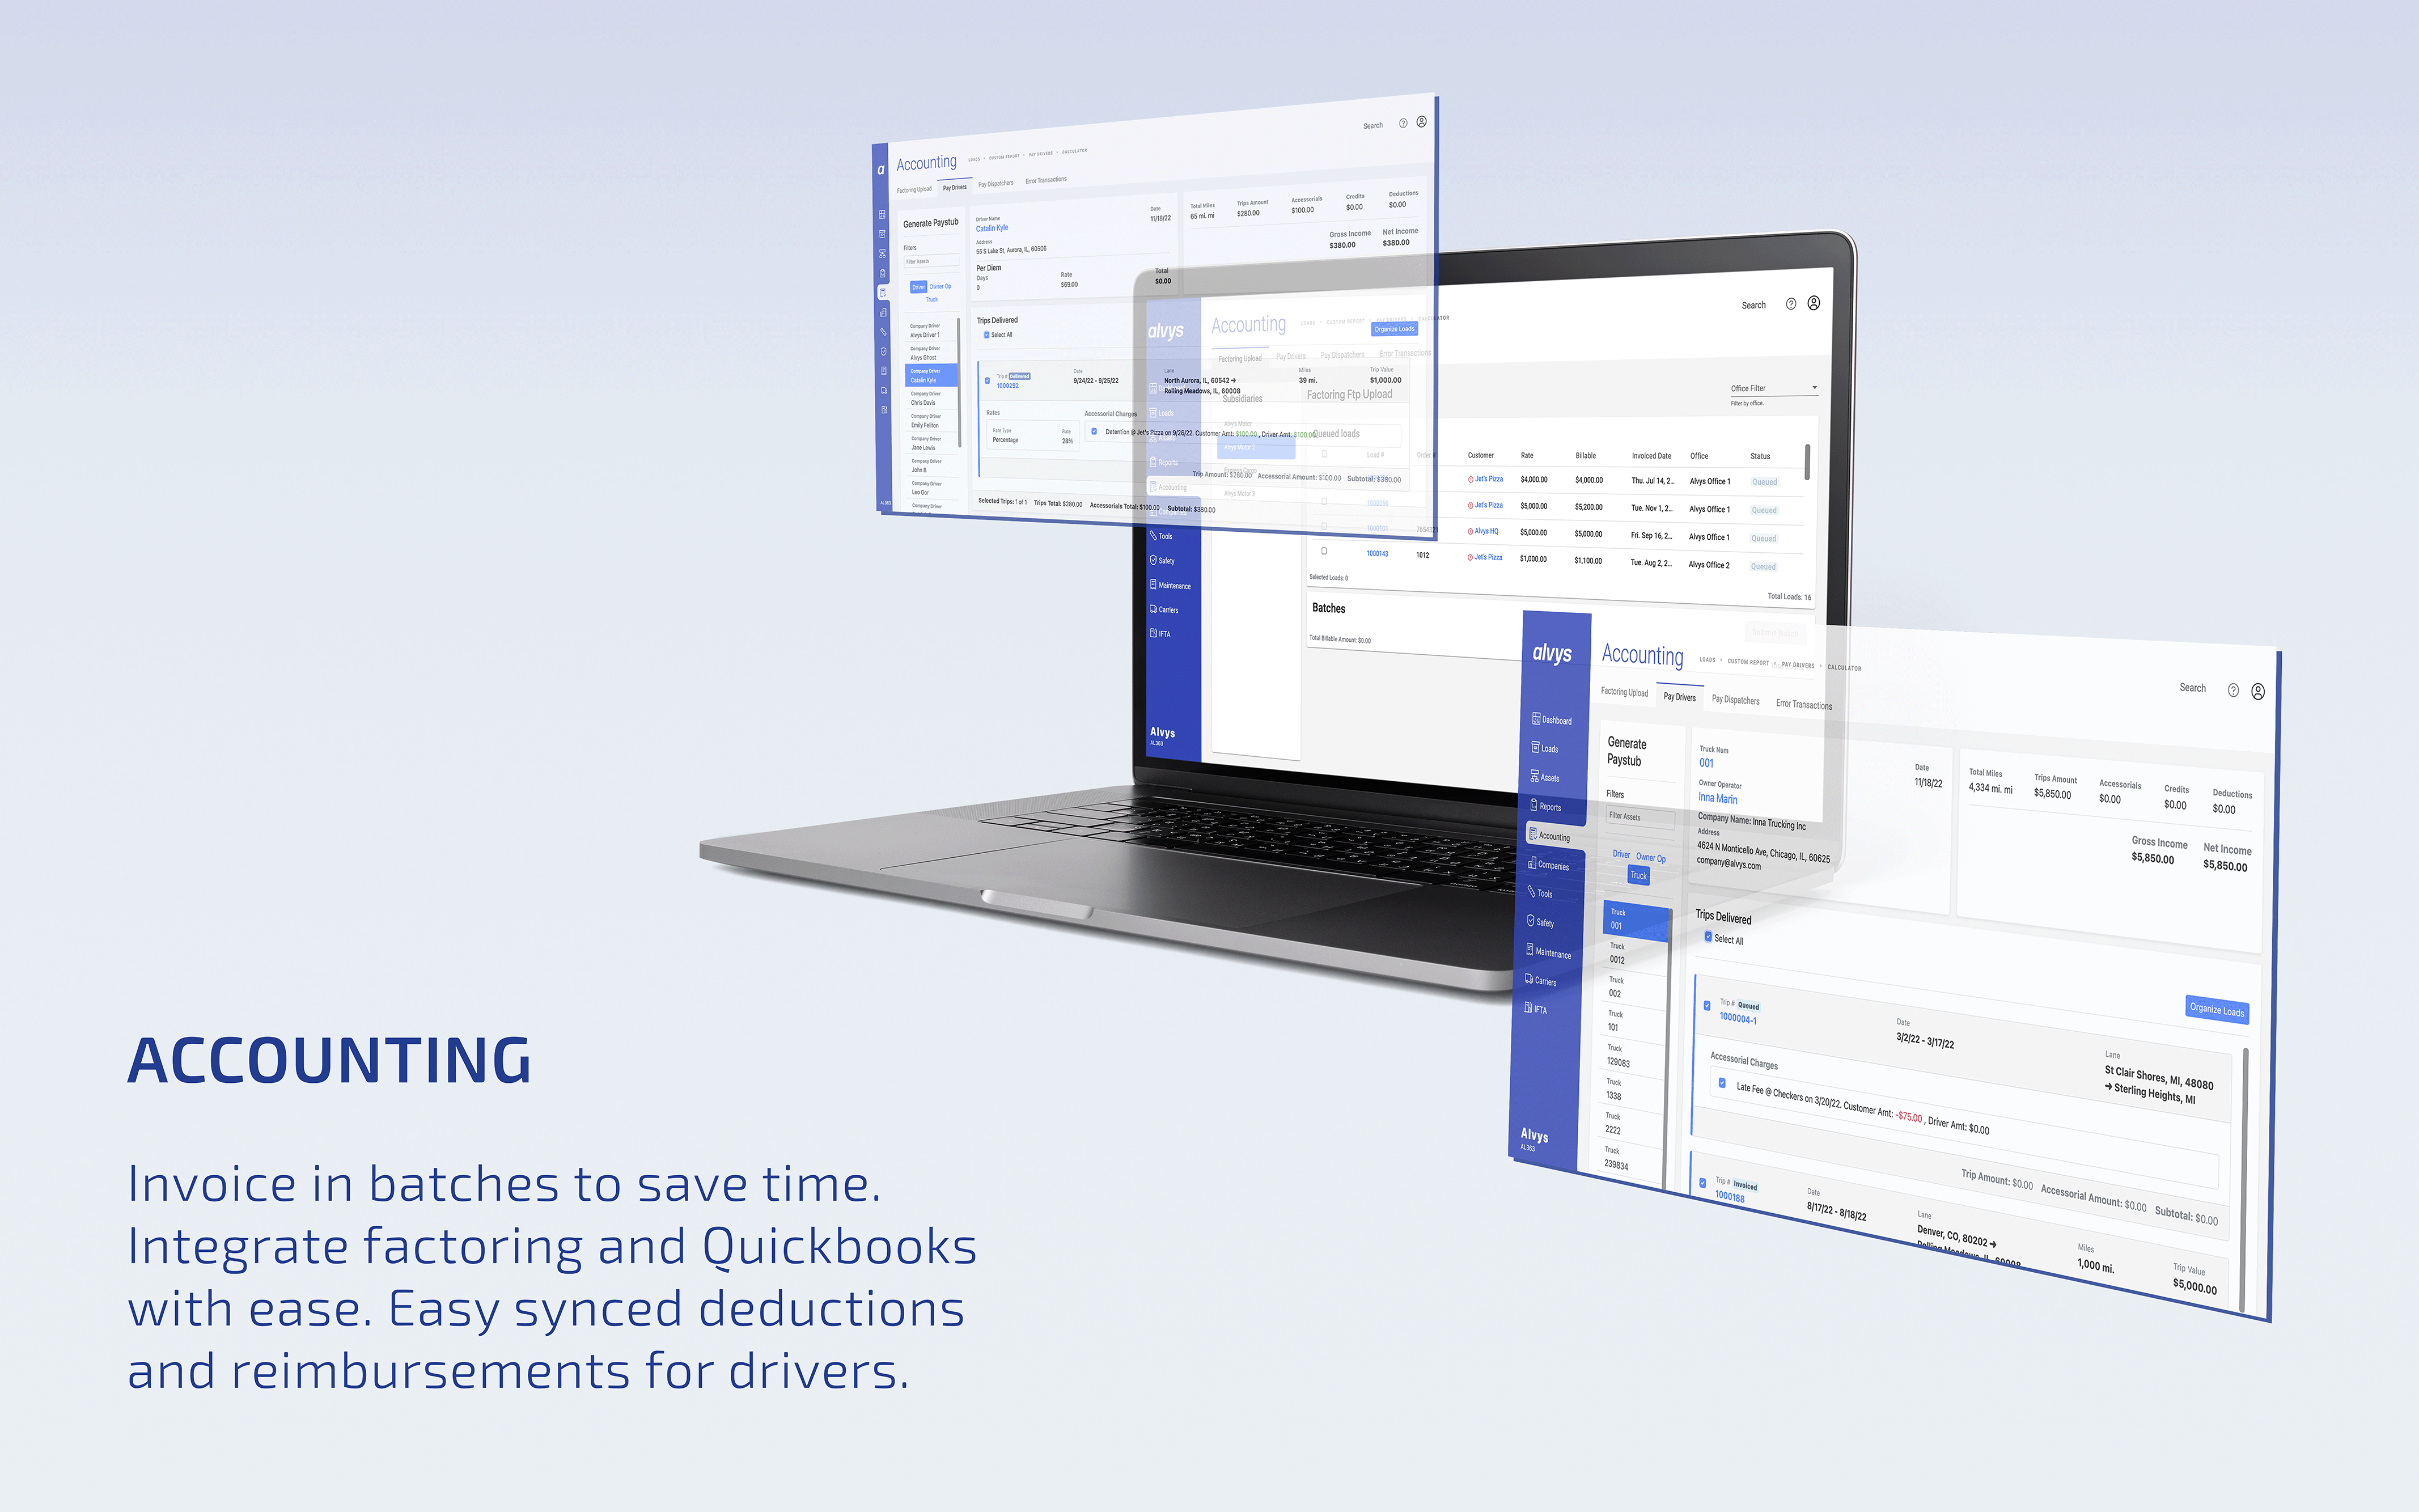 Accounting Module. Invoice in batches to save time. Integrate factoring and Quickbooks with ease. Easy synced deductions and reimbursements for drivers.